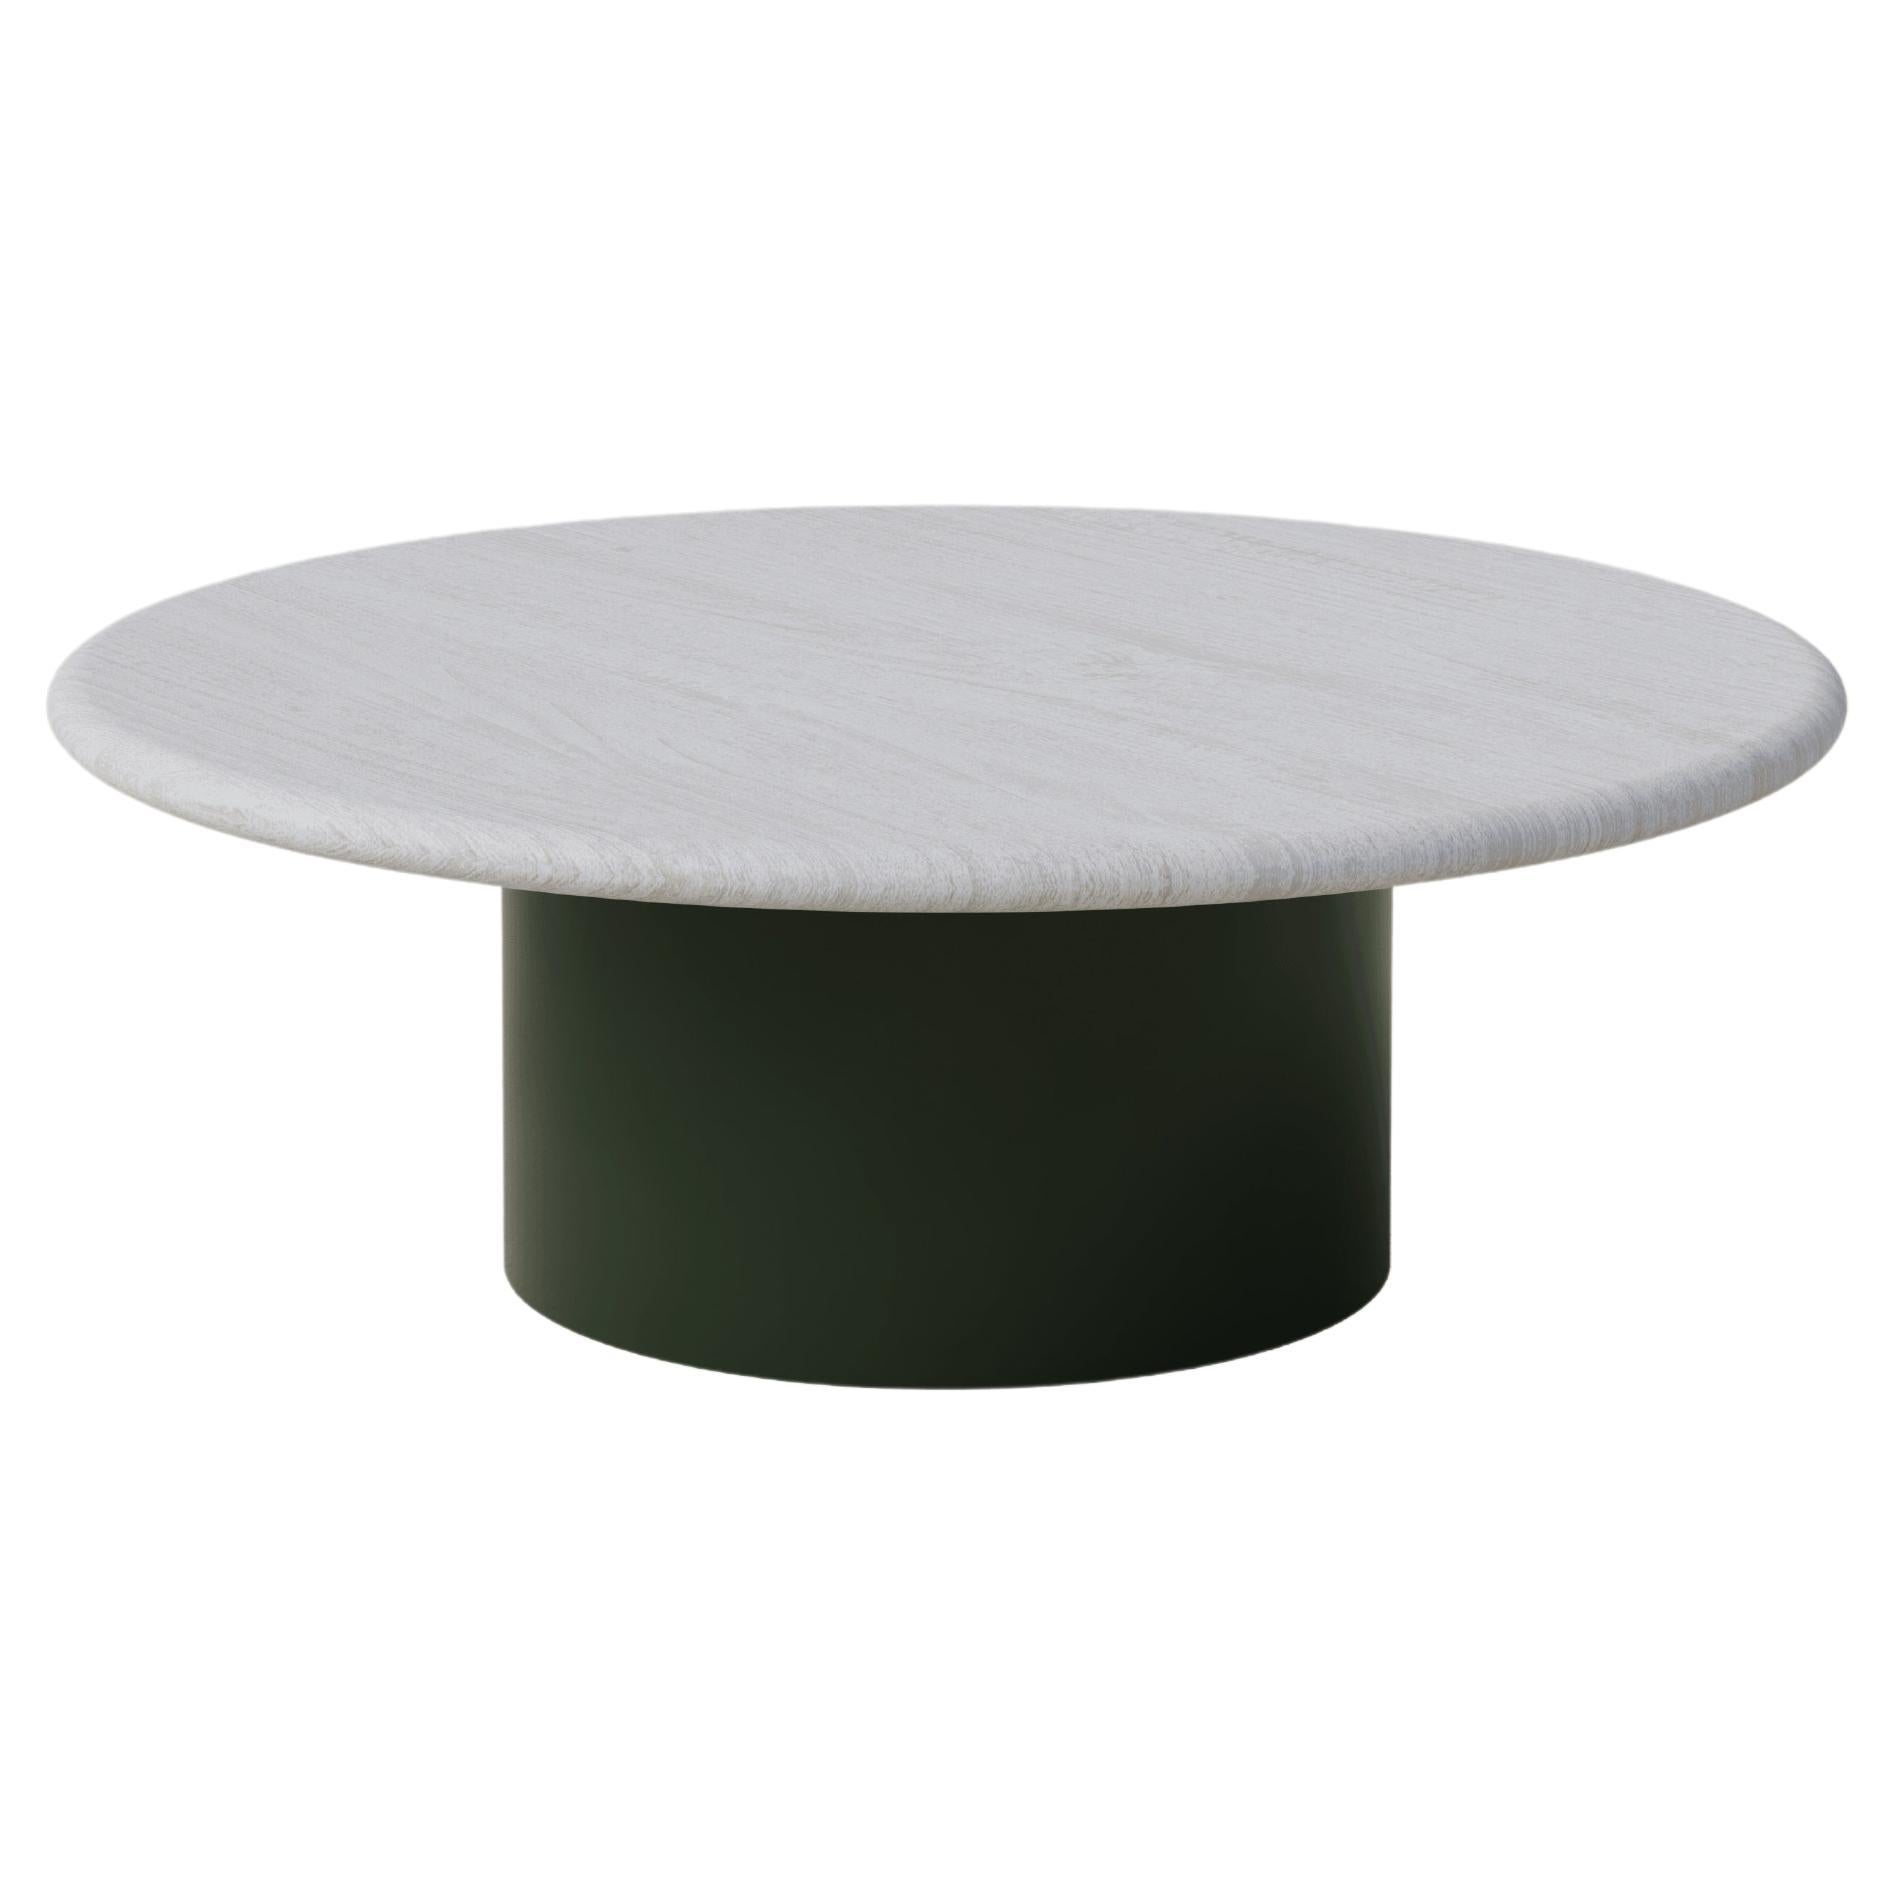 Raindrop Coffee Table, 800, White Oak / Moss Green For Sale